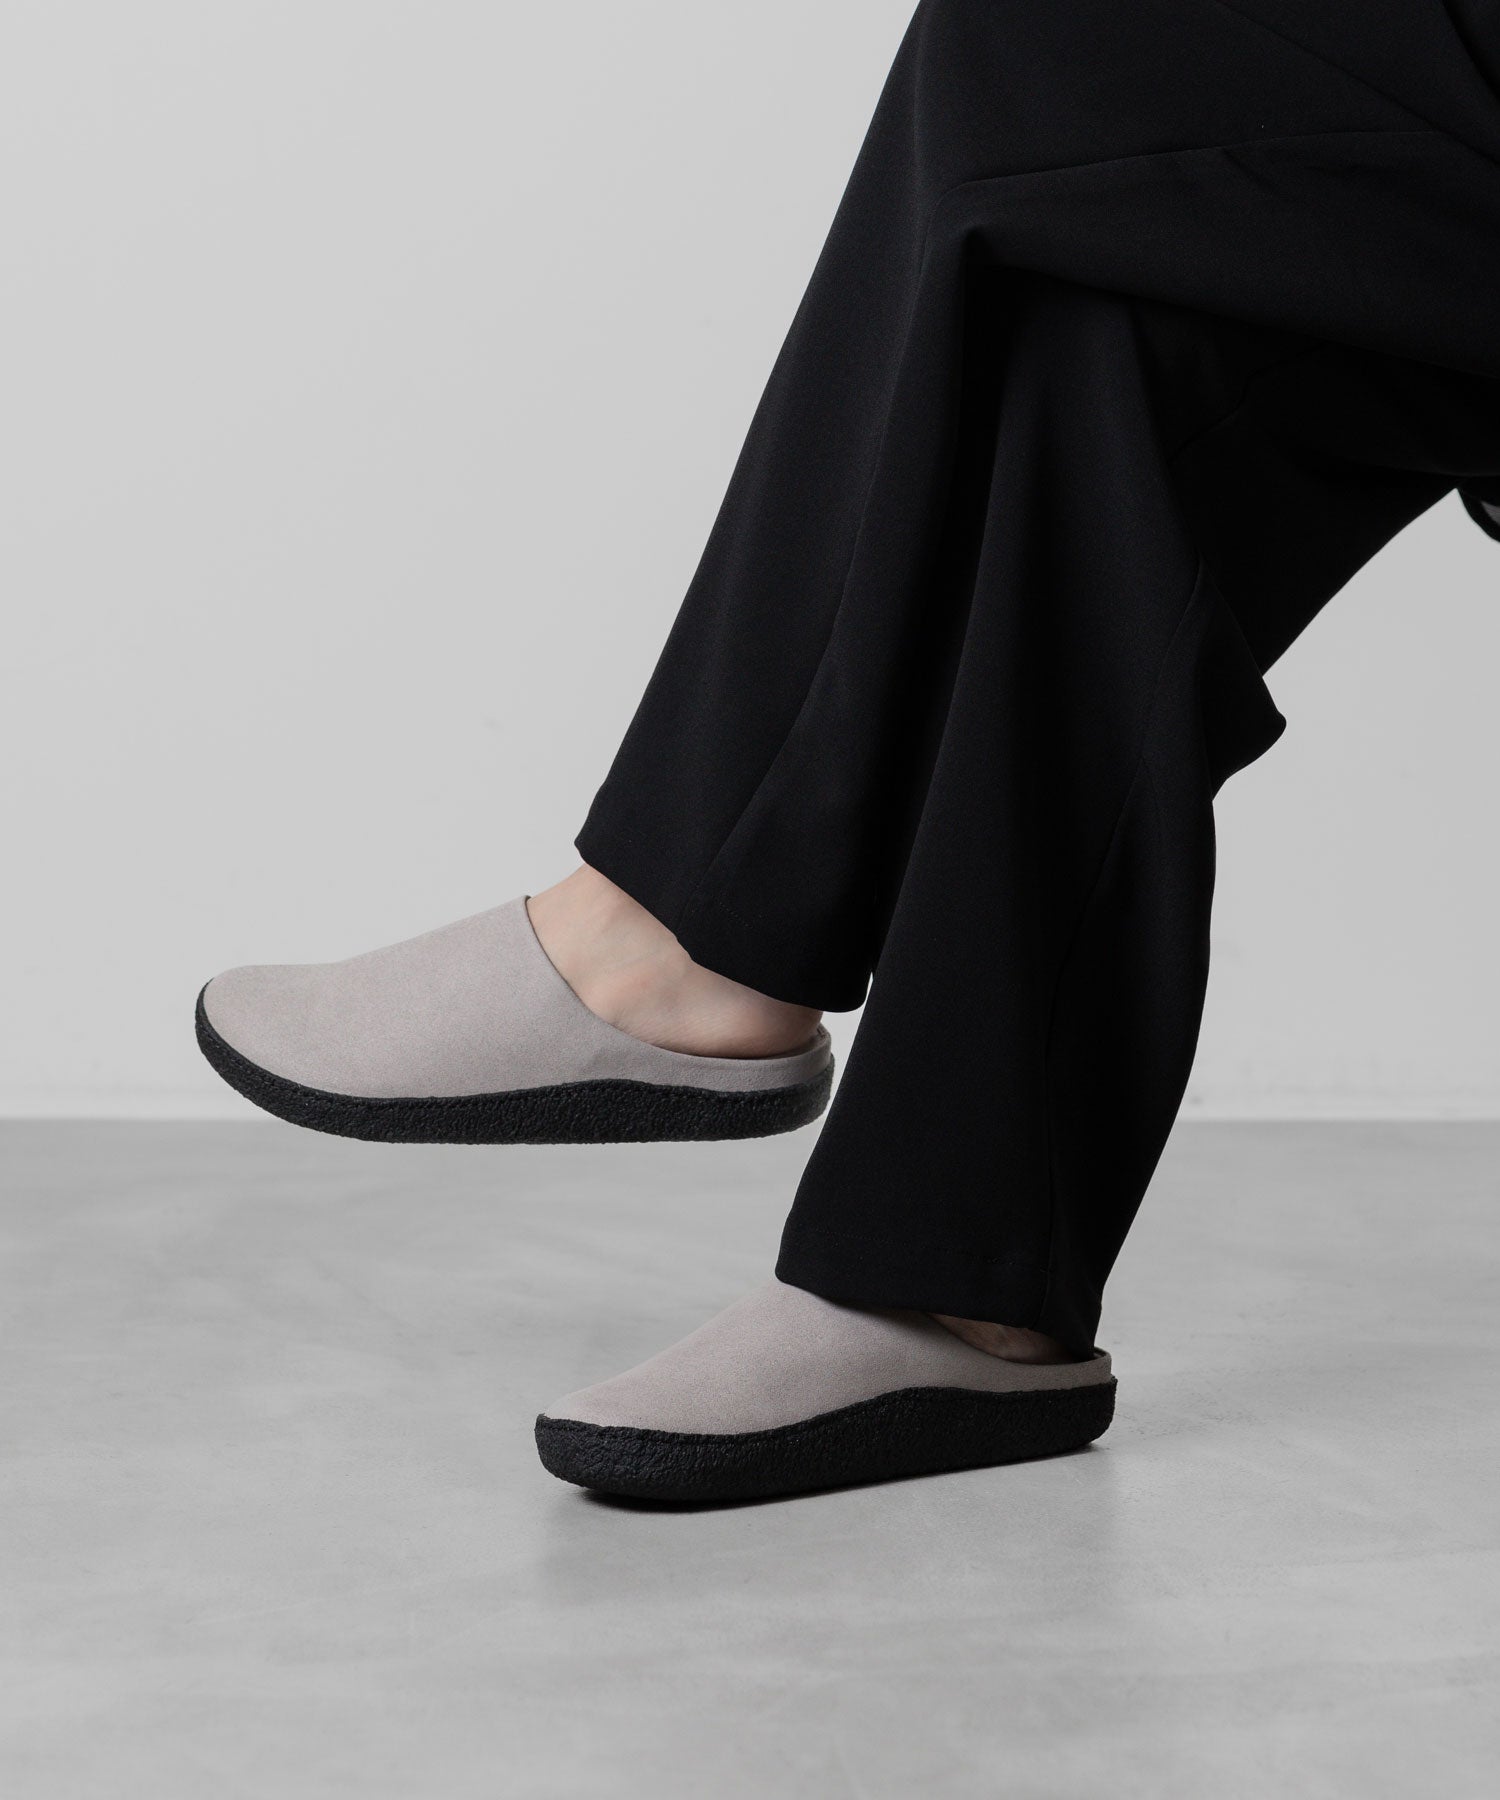 【ATTACHMENT】ATTACHMENT アタッチメントのSYNTHETIC SUEDE LEATHER MULE - L.GRAY 公式通販サイトsession福岡セレクトショップ